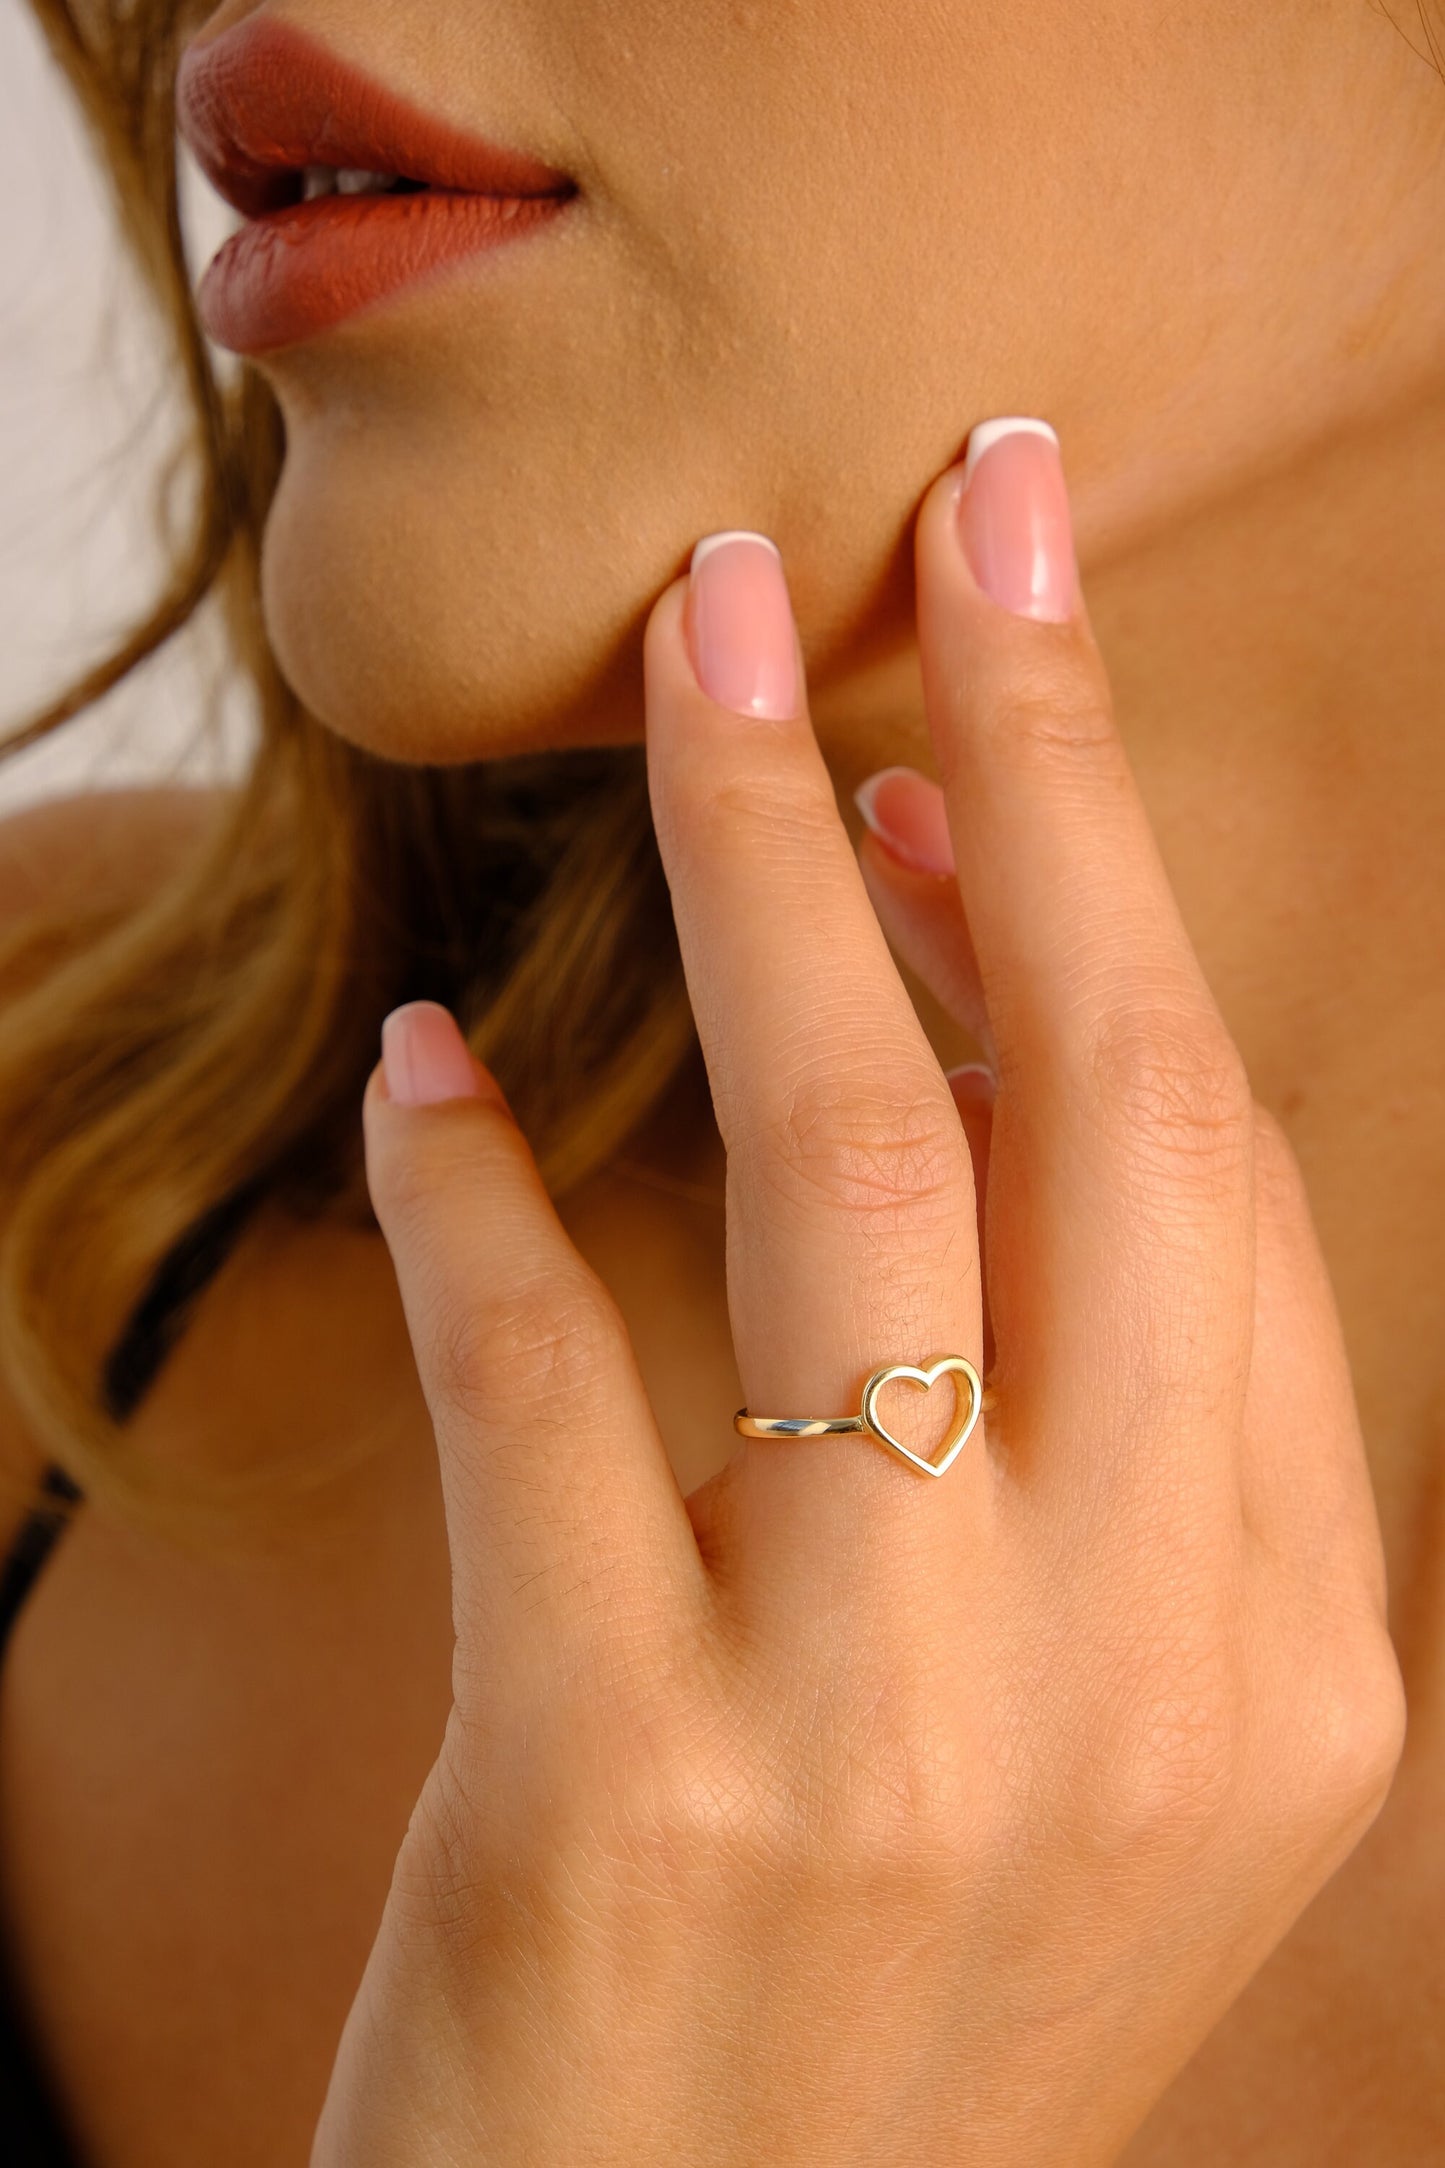 14K Gold Heart Ring, Open Heart Ring, Dainty Gold Band Ring, Love Heart Ring, Promise Ring, Minimalist ring, Heart Gold Ring, Best Friend